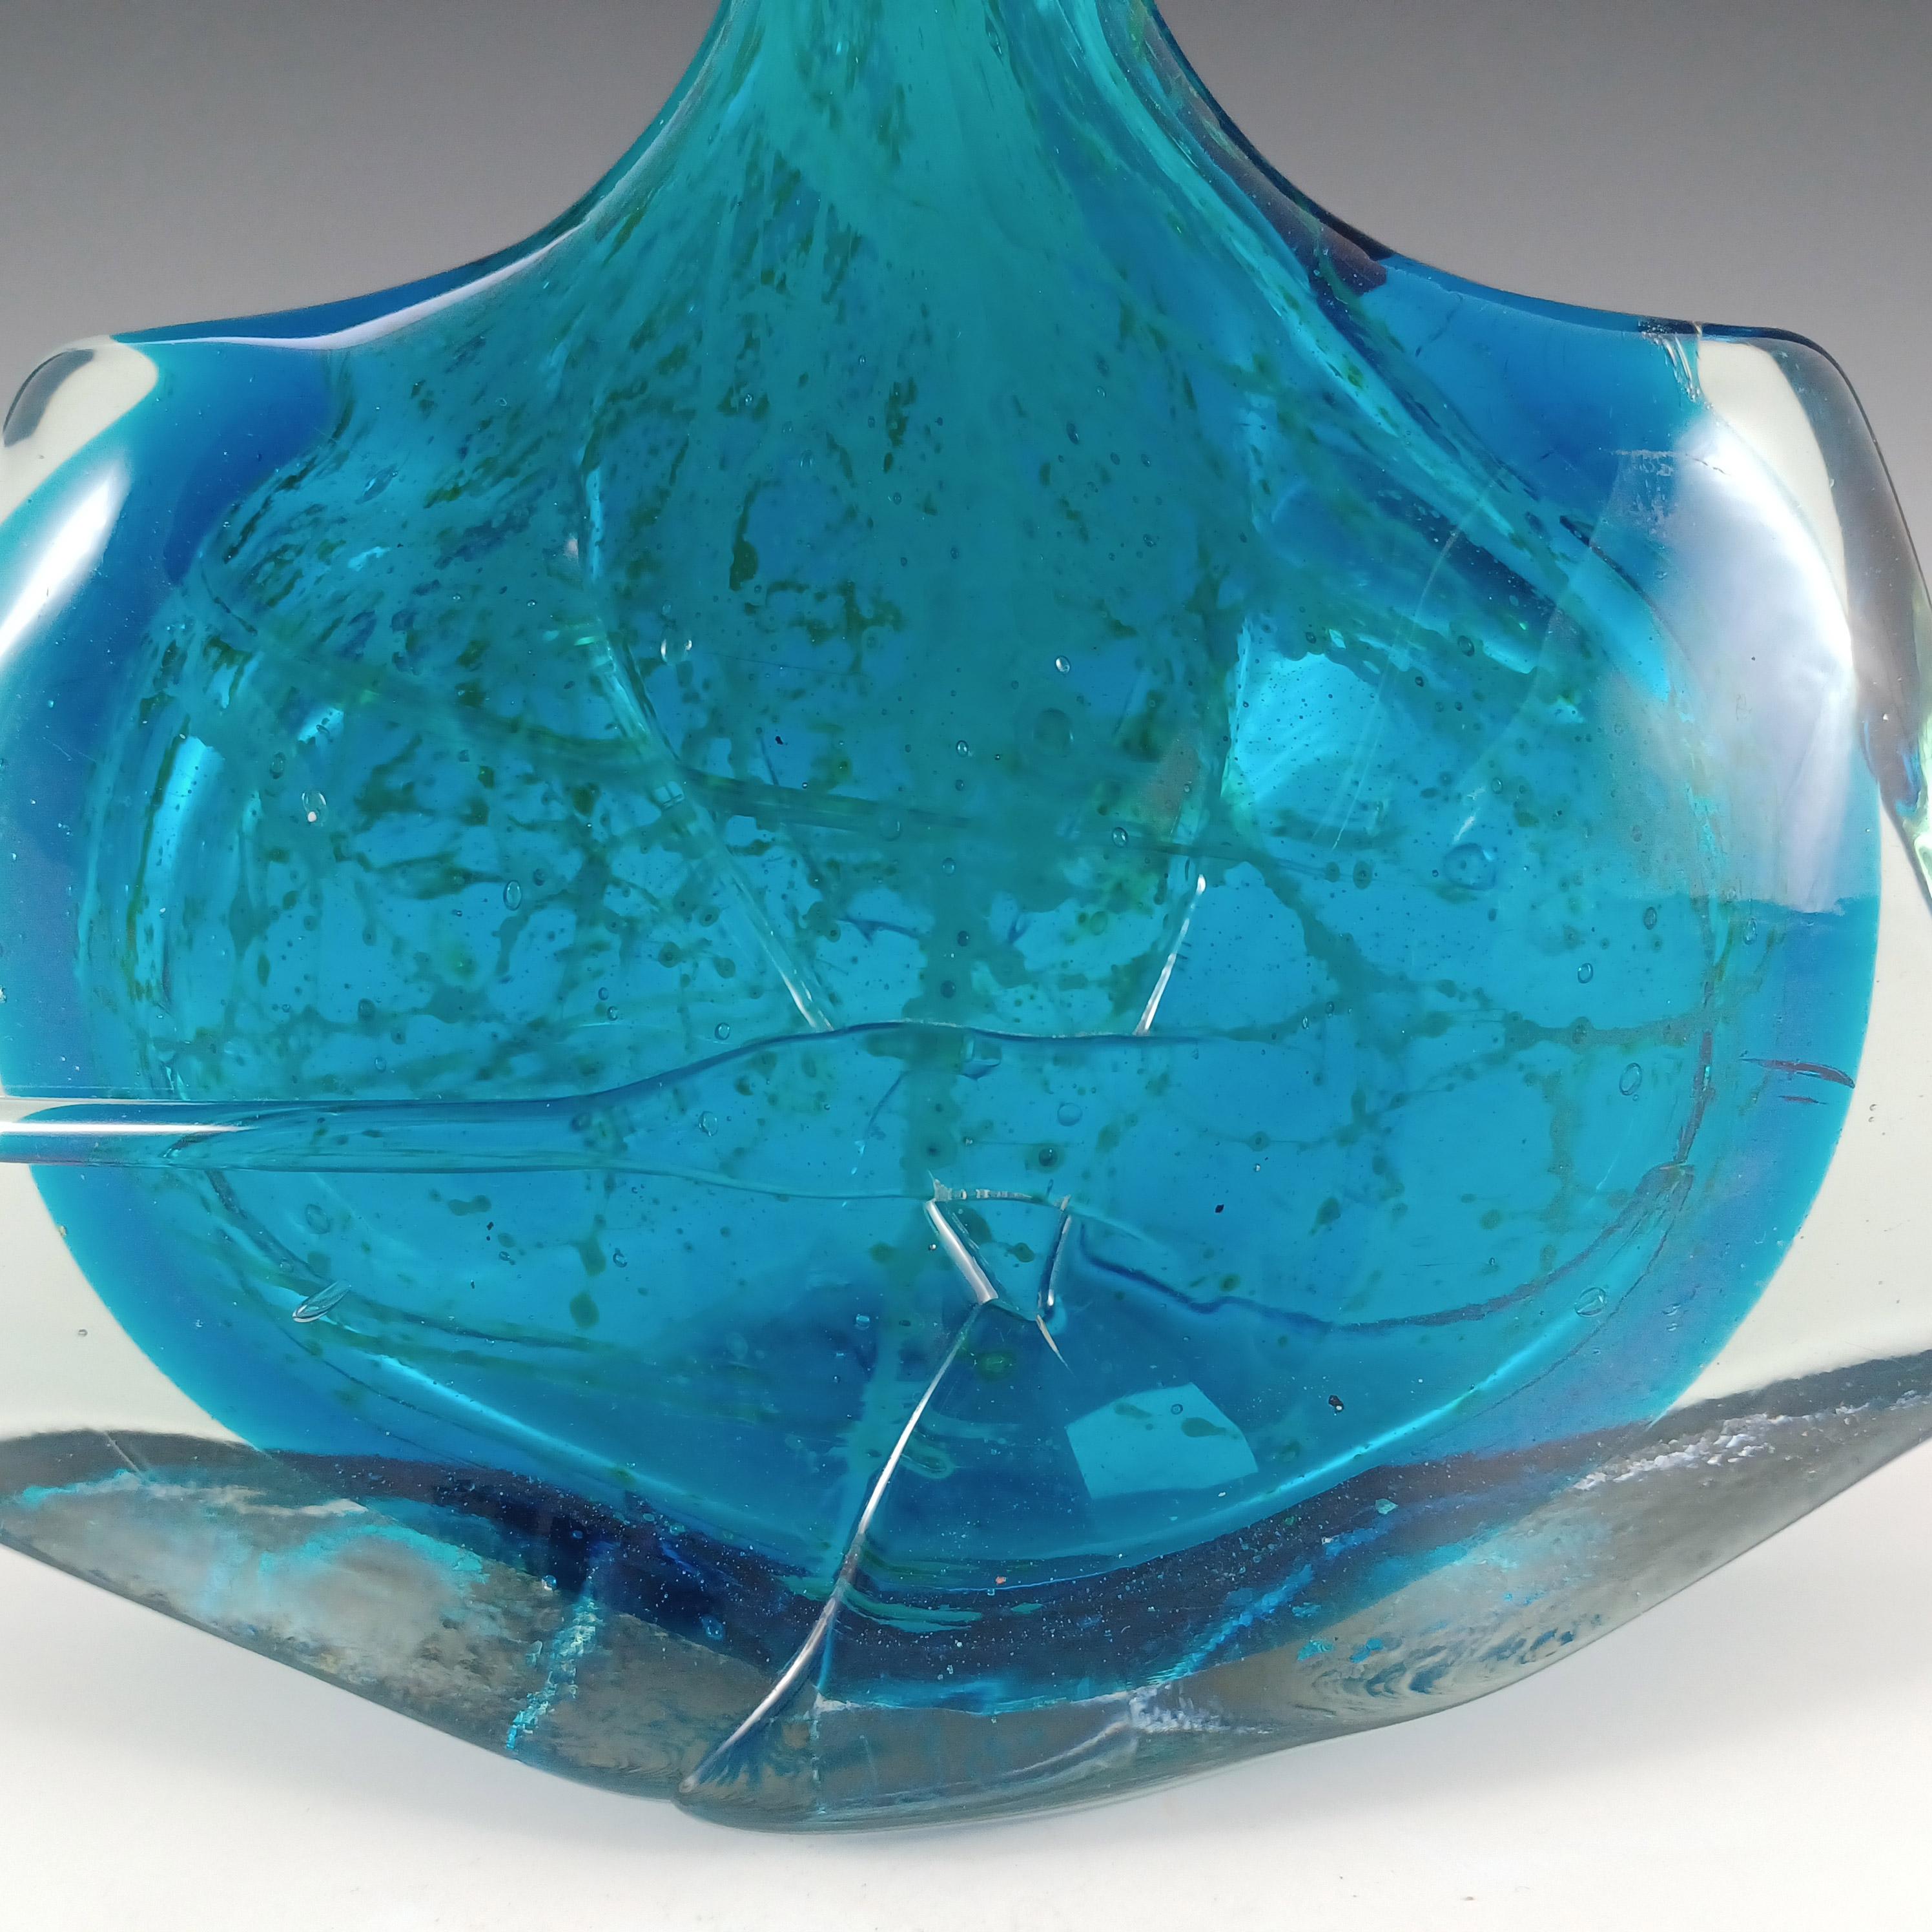 Mdina Maltese Blue Glass 'Fish' / 'Axe Head' Vase - Signed 1979 In Good Condition For Sale In Bolton, GB